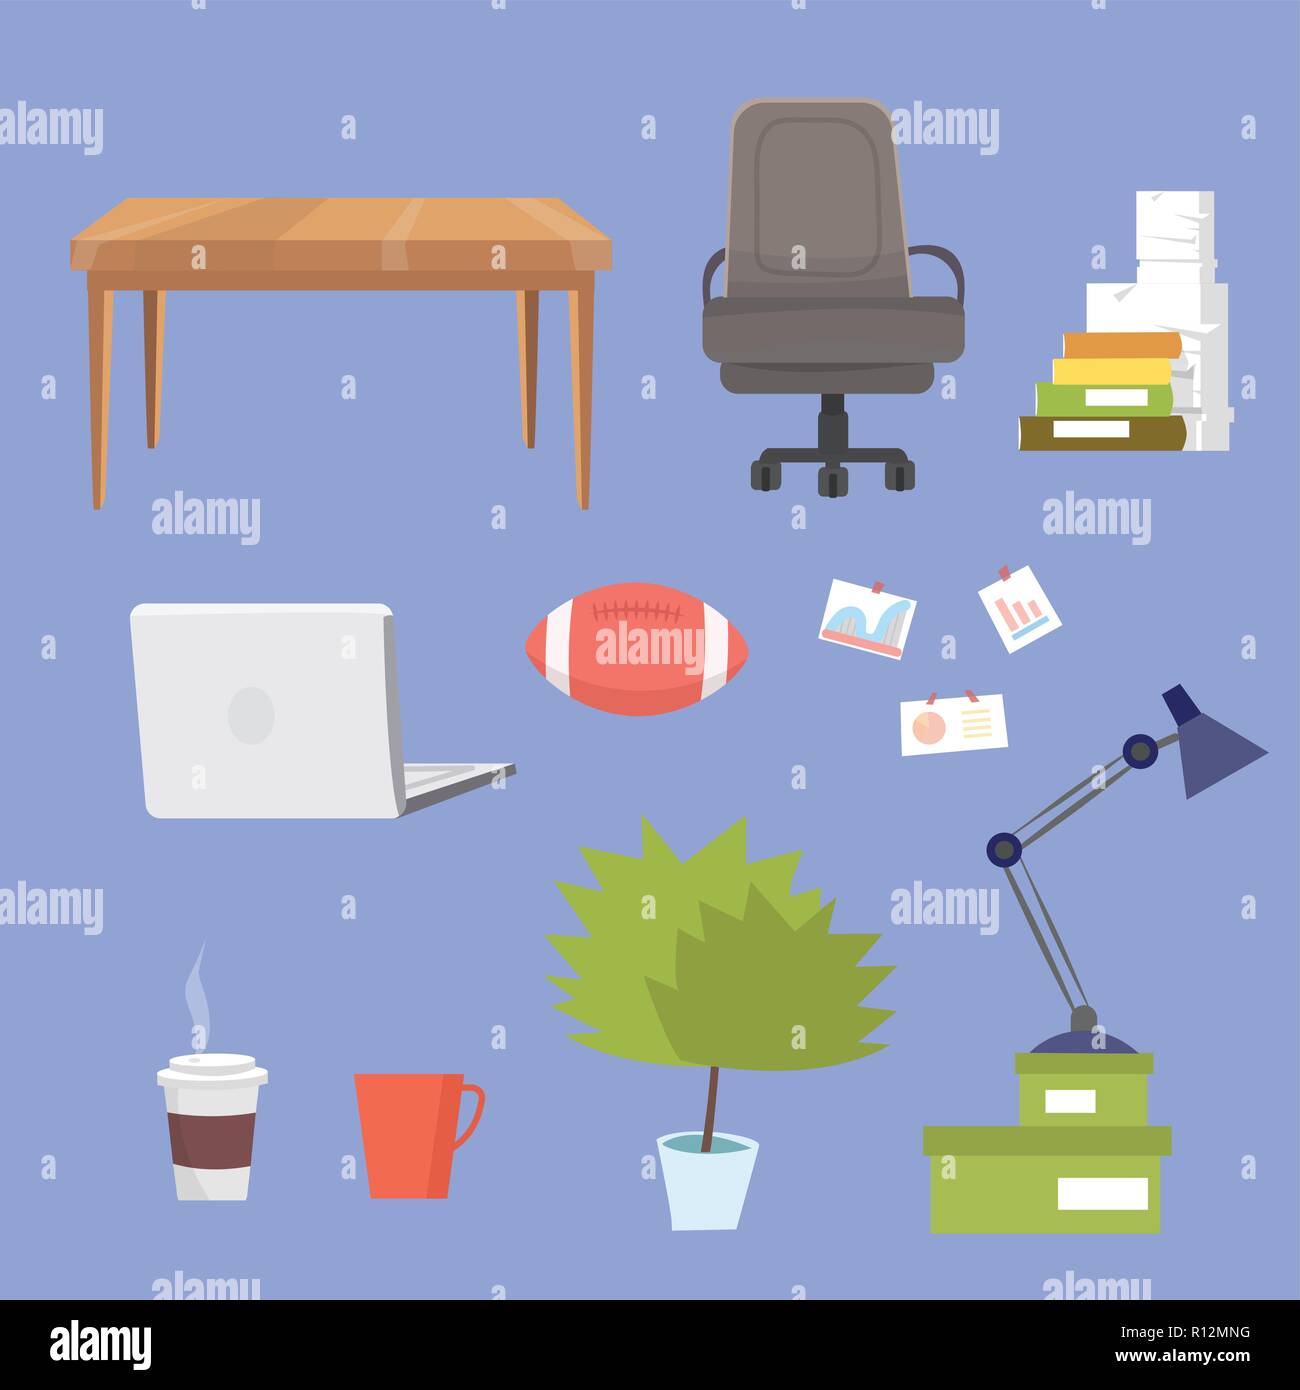 Small Clipart Collection With Office Furniture Equipment And